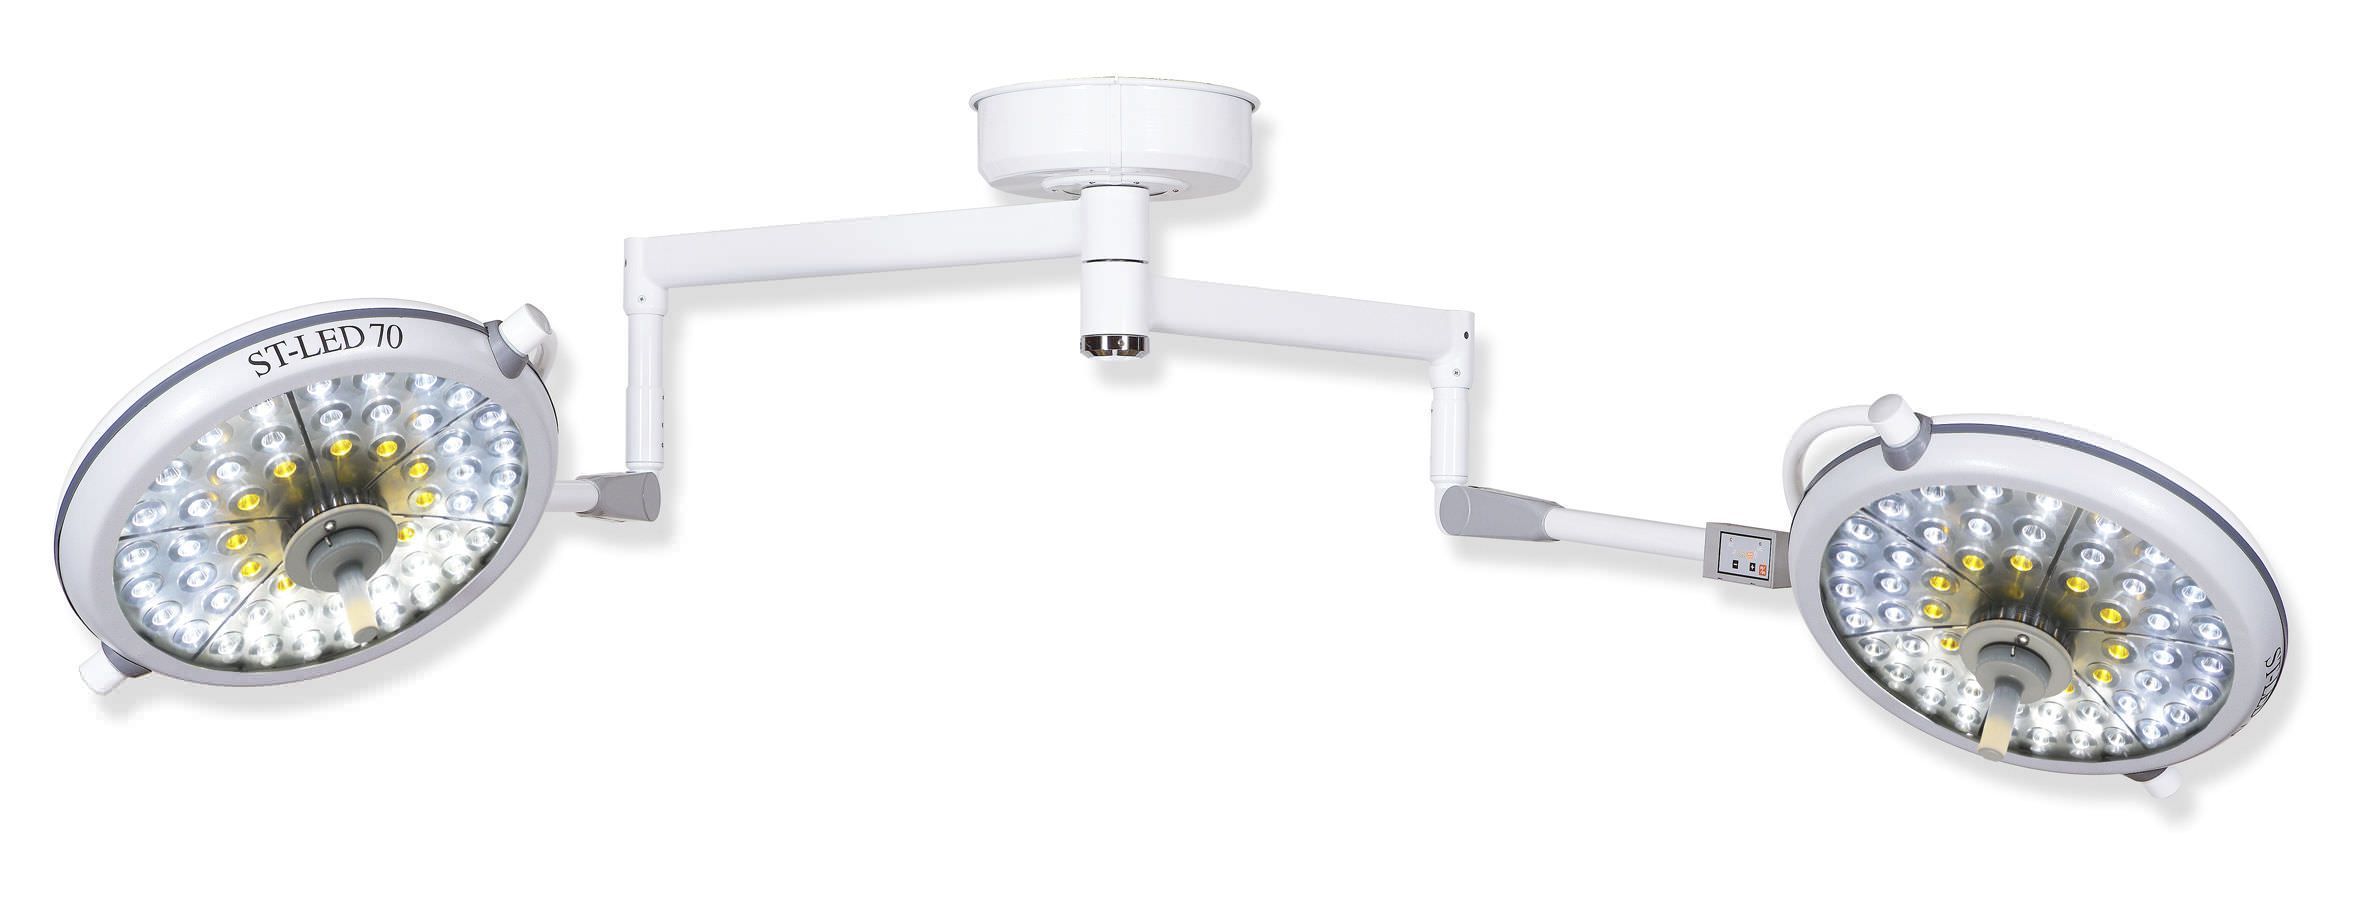 LED surgical light / ceiling-mounted / 2-arm ST-LED70D St. Francis Medical Equipment